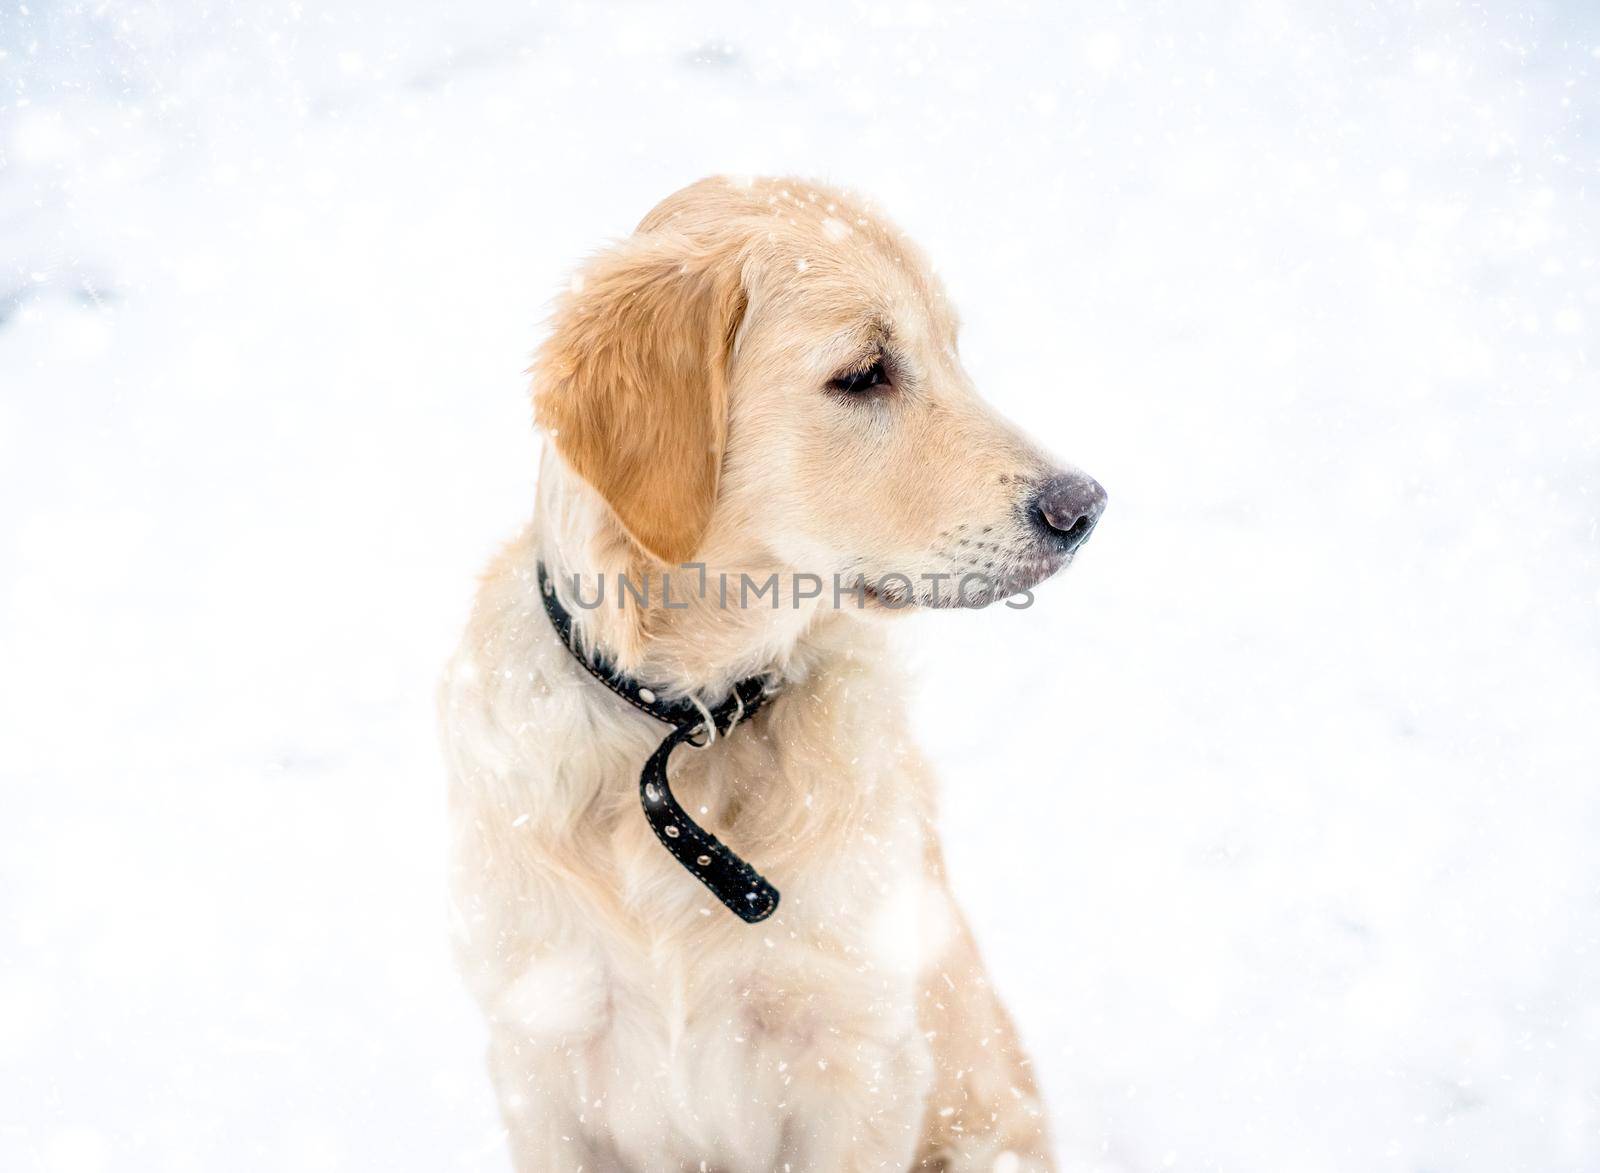 Beautiful young dog sitting outside under falling white snow